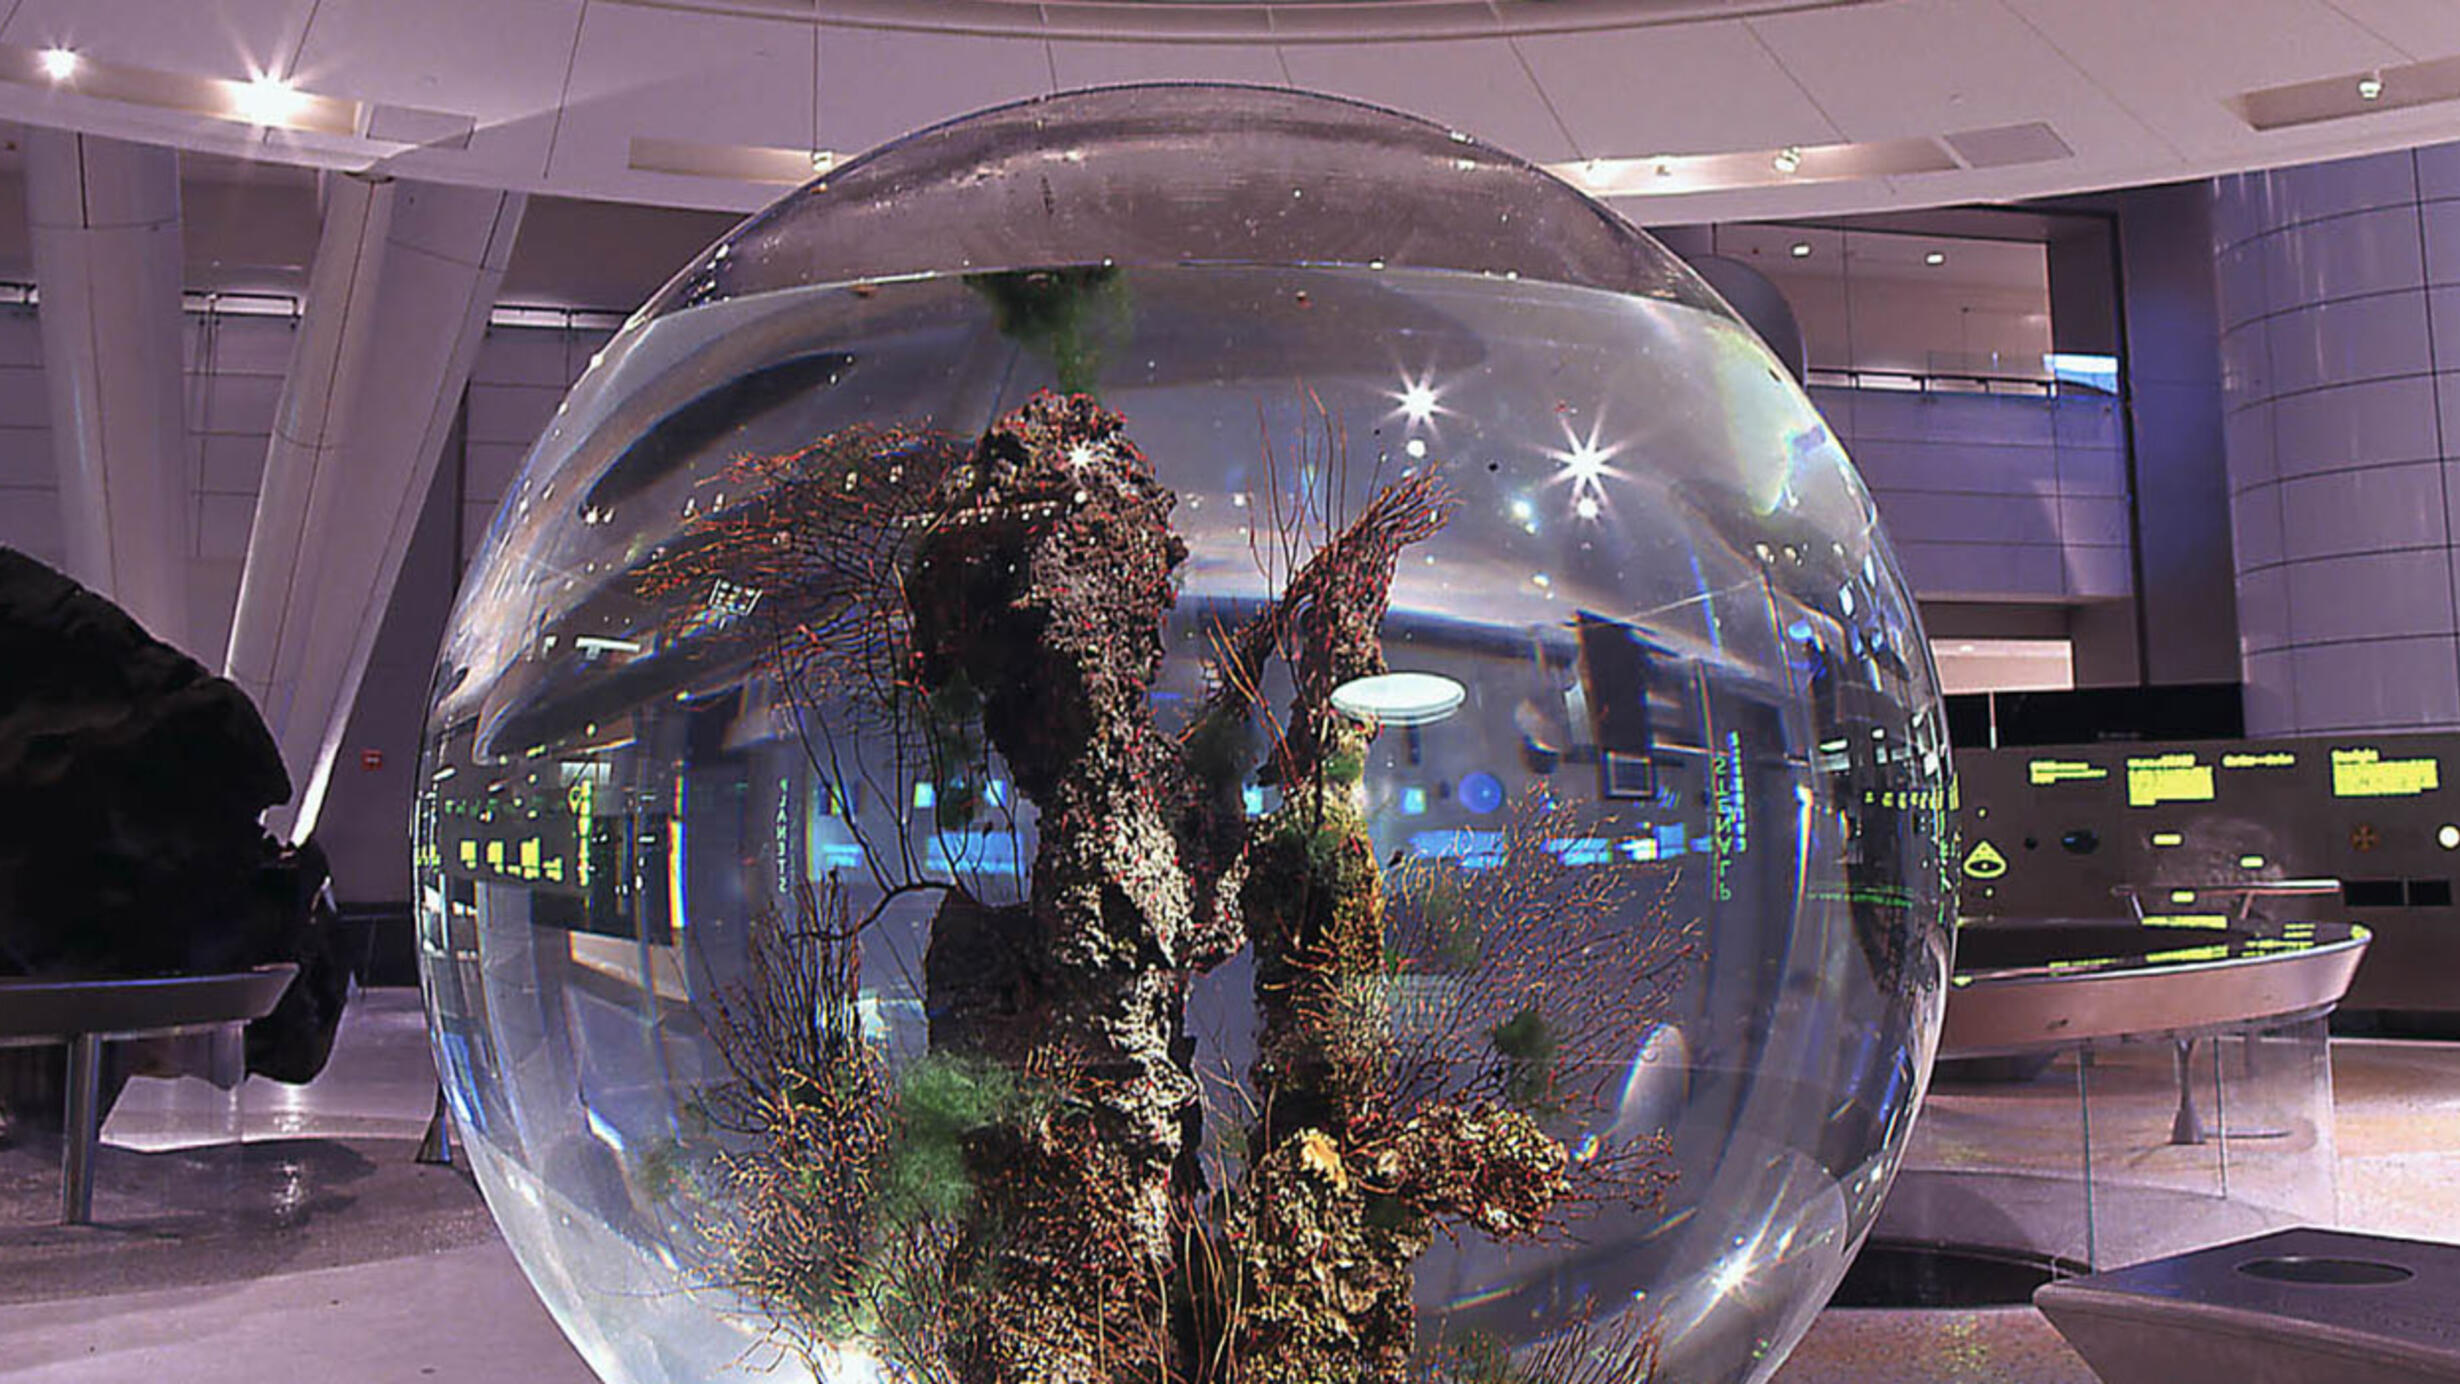 Large sealed glass sphere contains a complete ecosystem of plants and animals, which recycle nutrients and obtain energy from sunlight. 